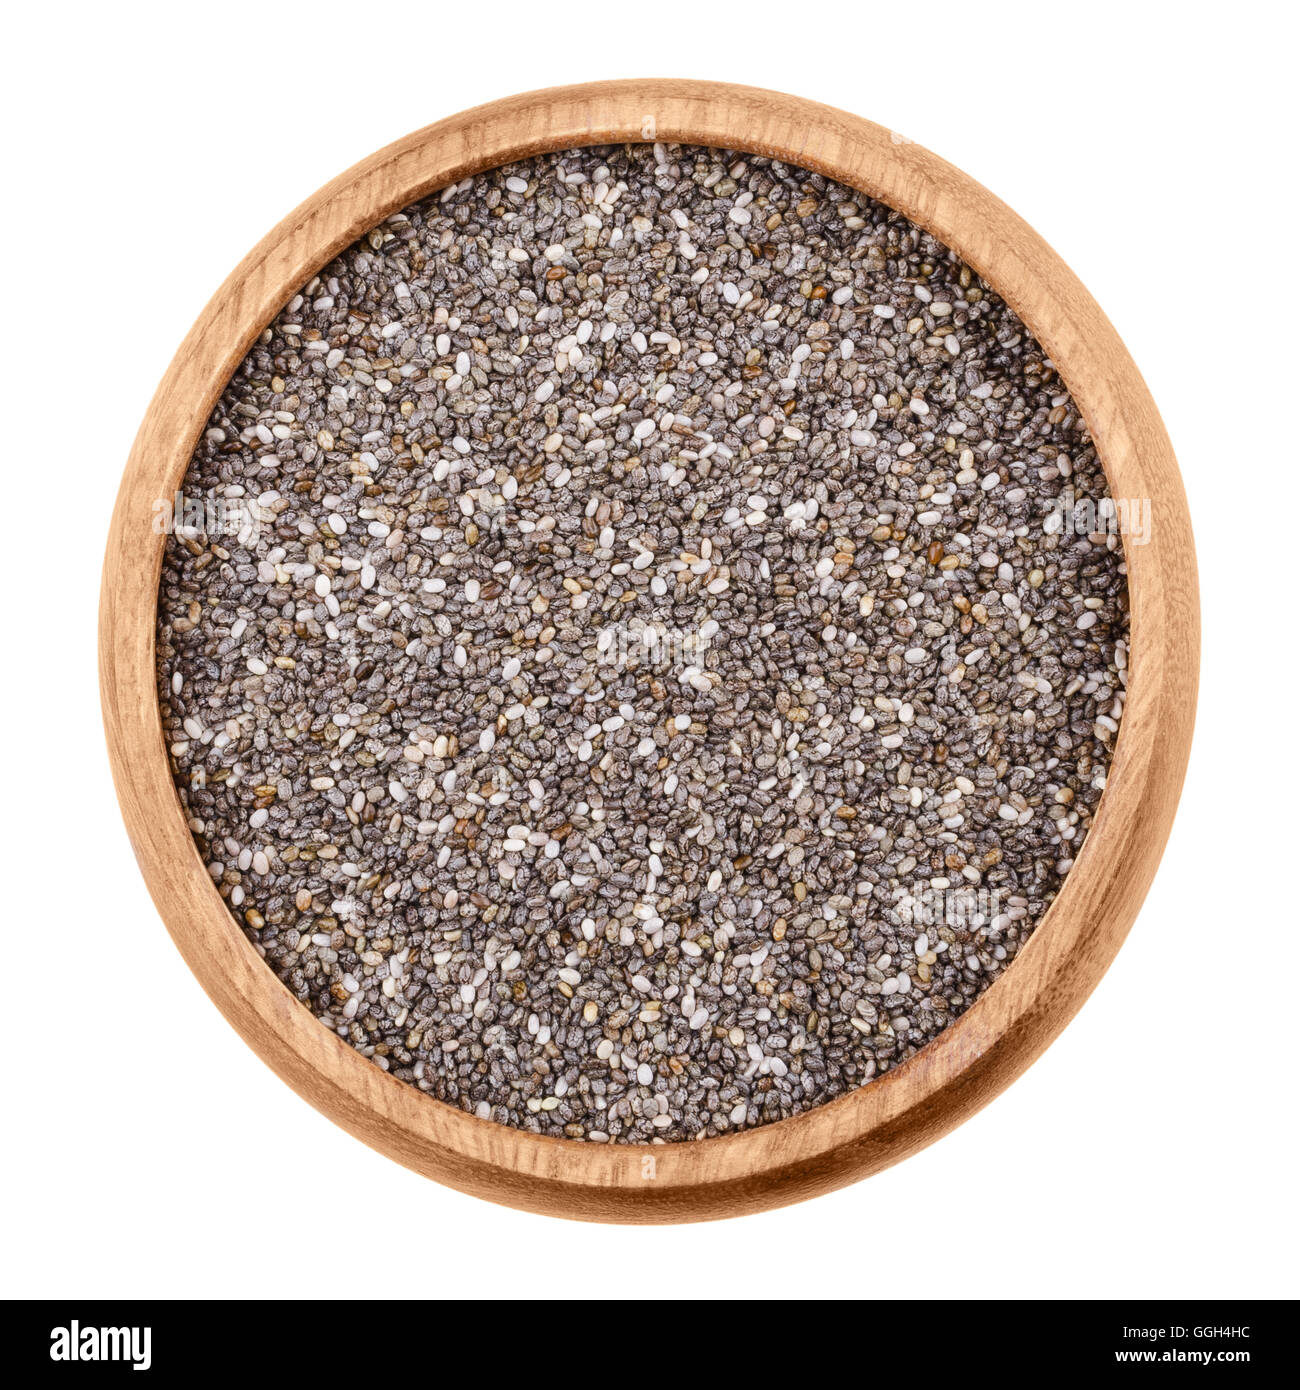 Chia seeds in a bowl on white background. Raw edible fruits of Salvia hispanica of the mint family, Lamiaceae, in a wooden bowl. Stock Photo